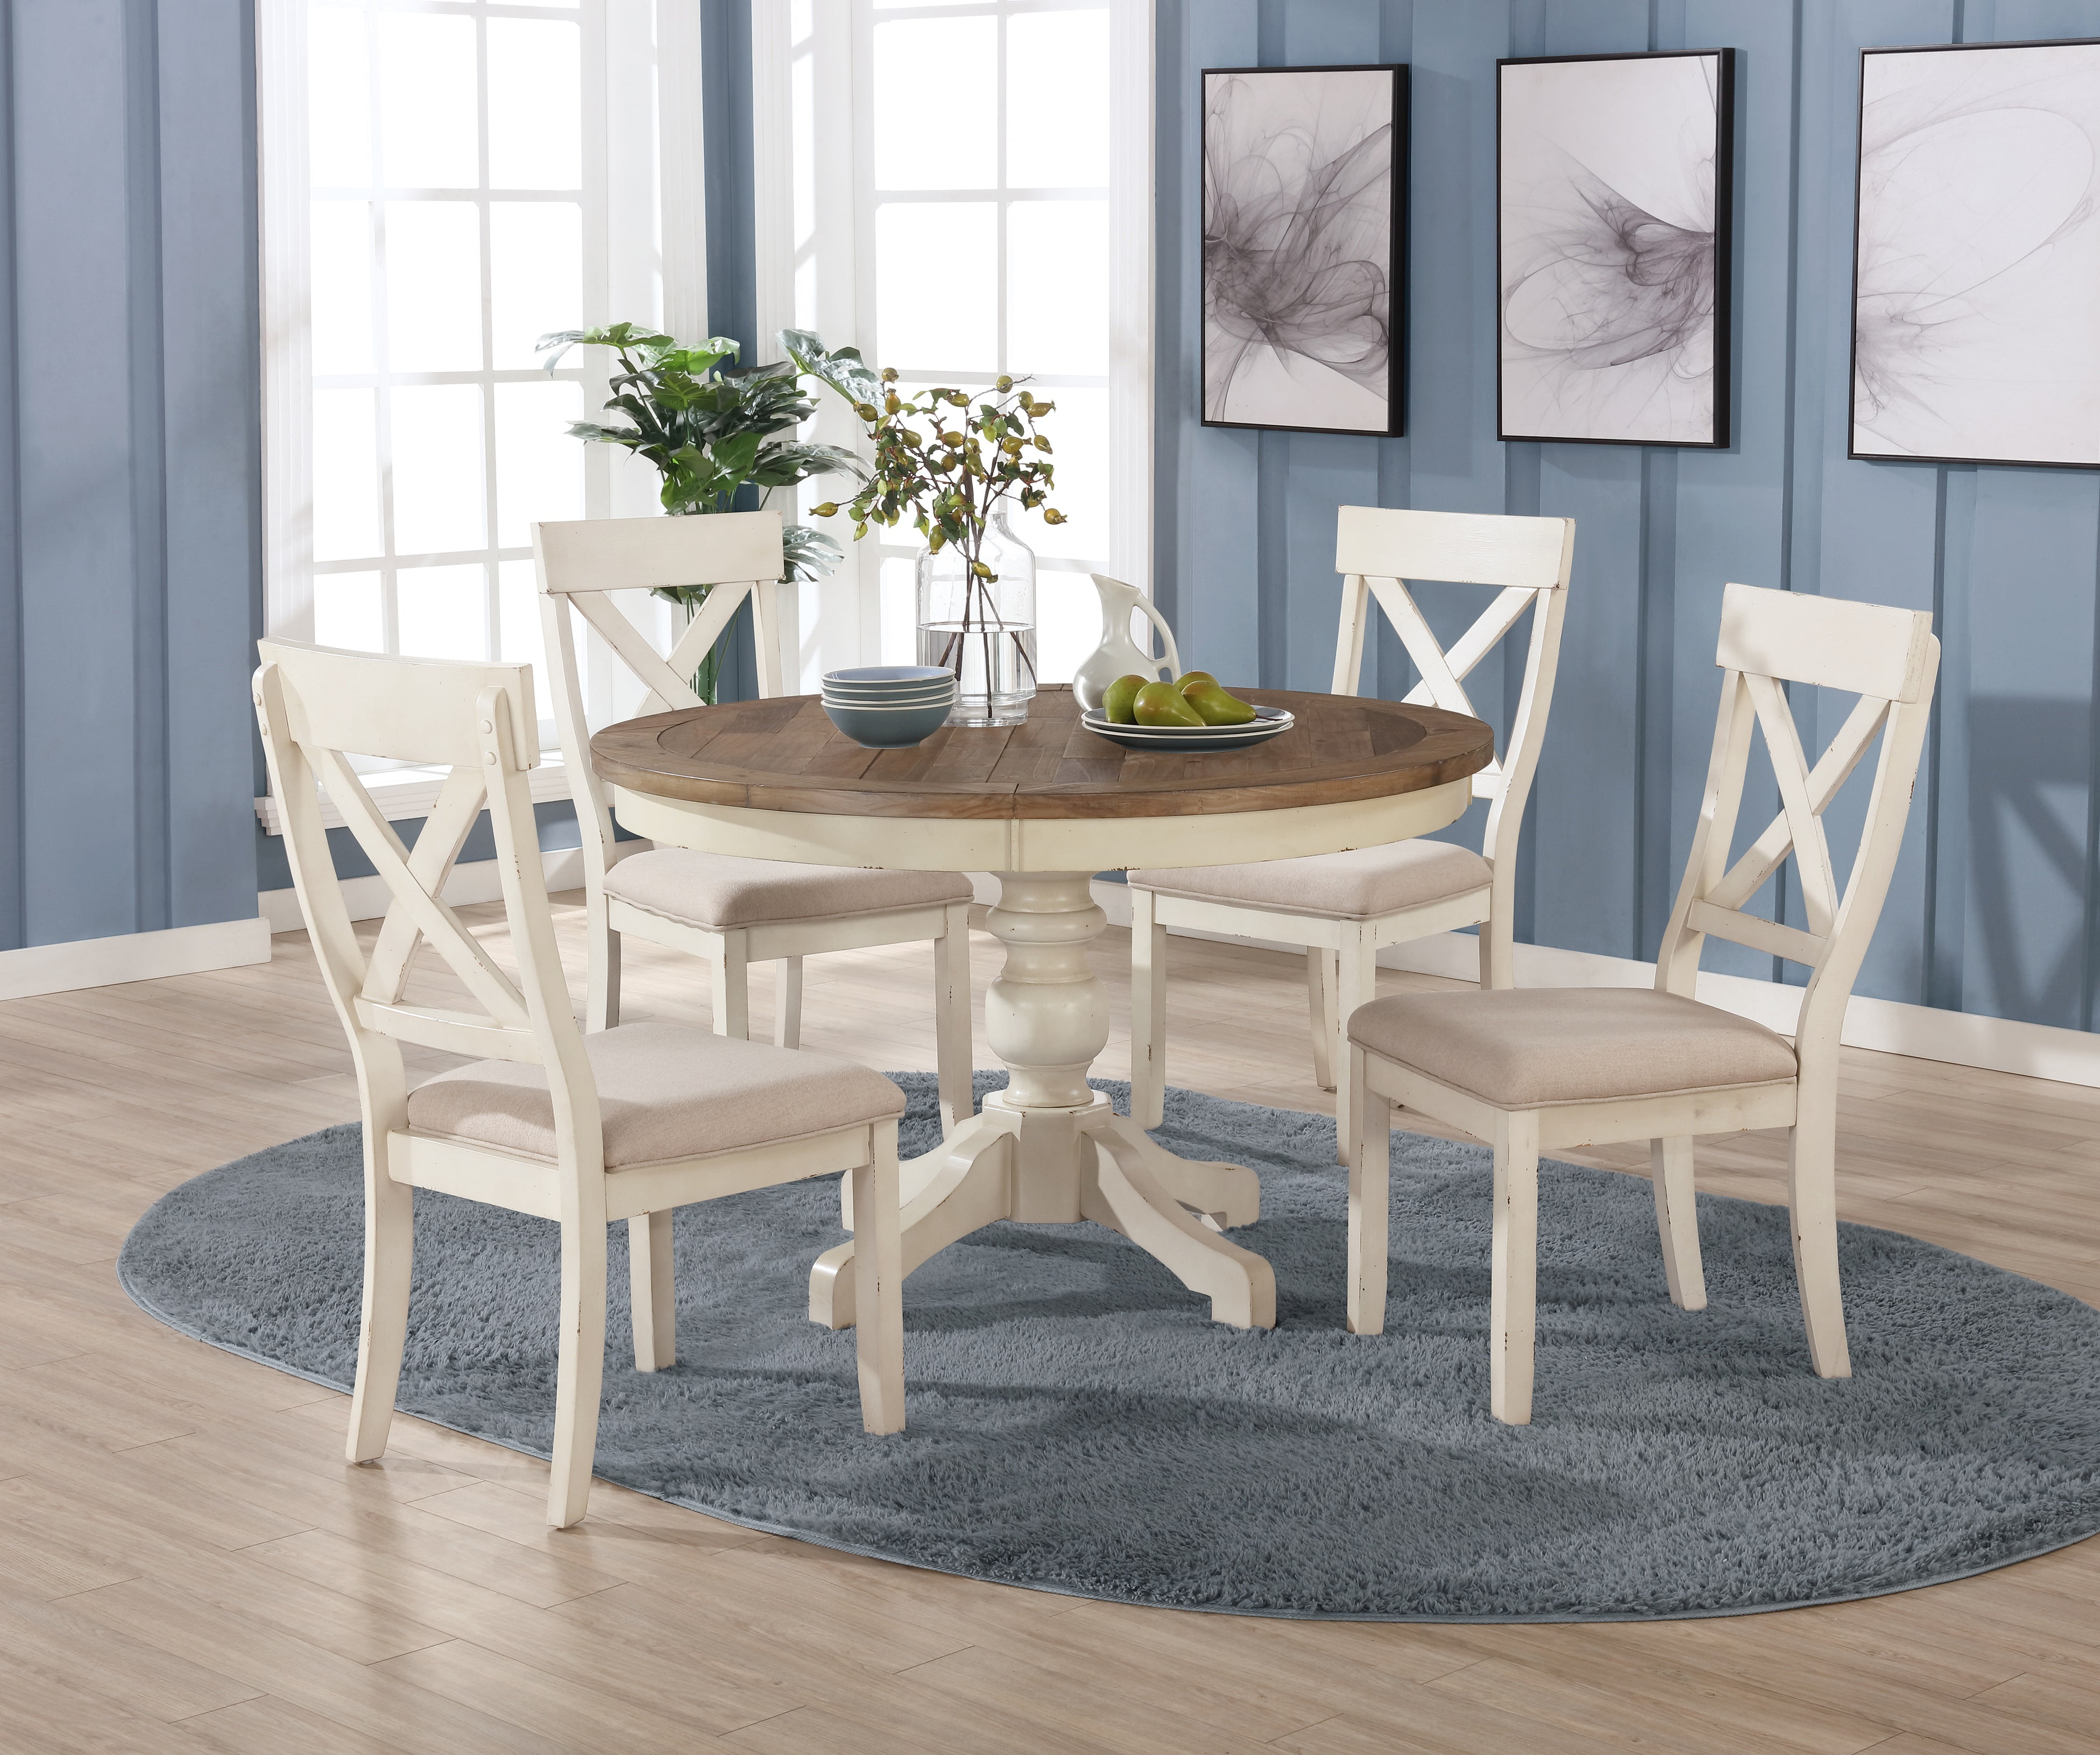 Roundhill Furniture Prato 5Piece Round Dining Table Set with Cross